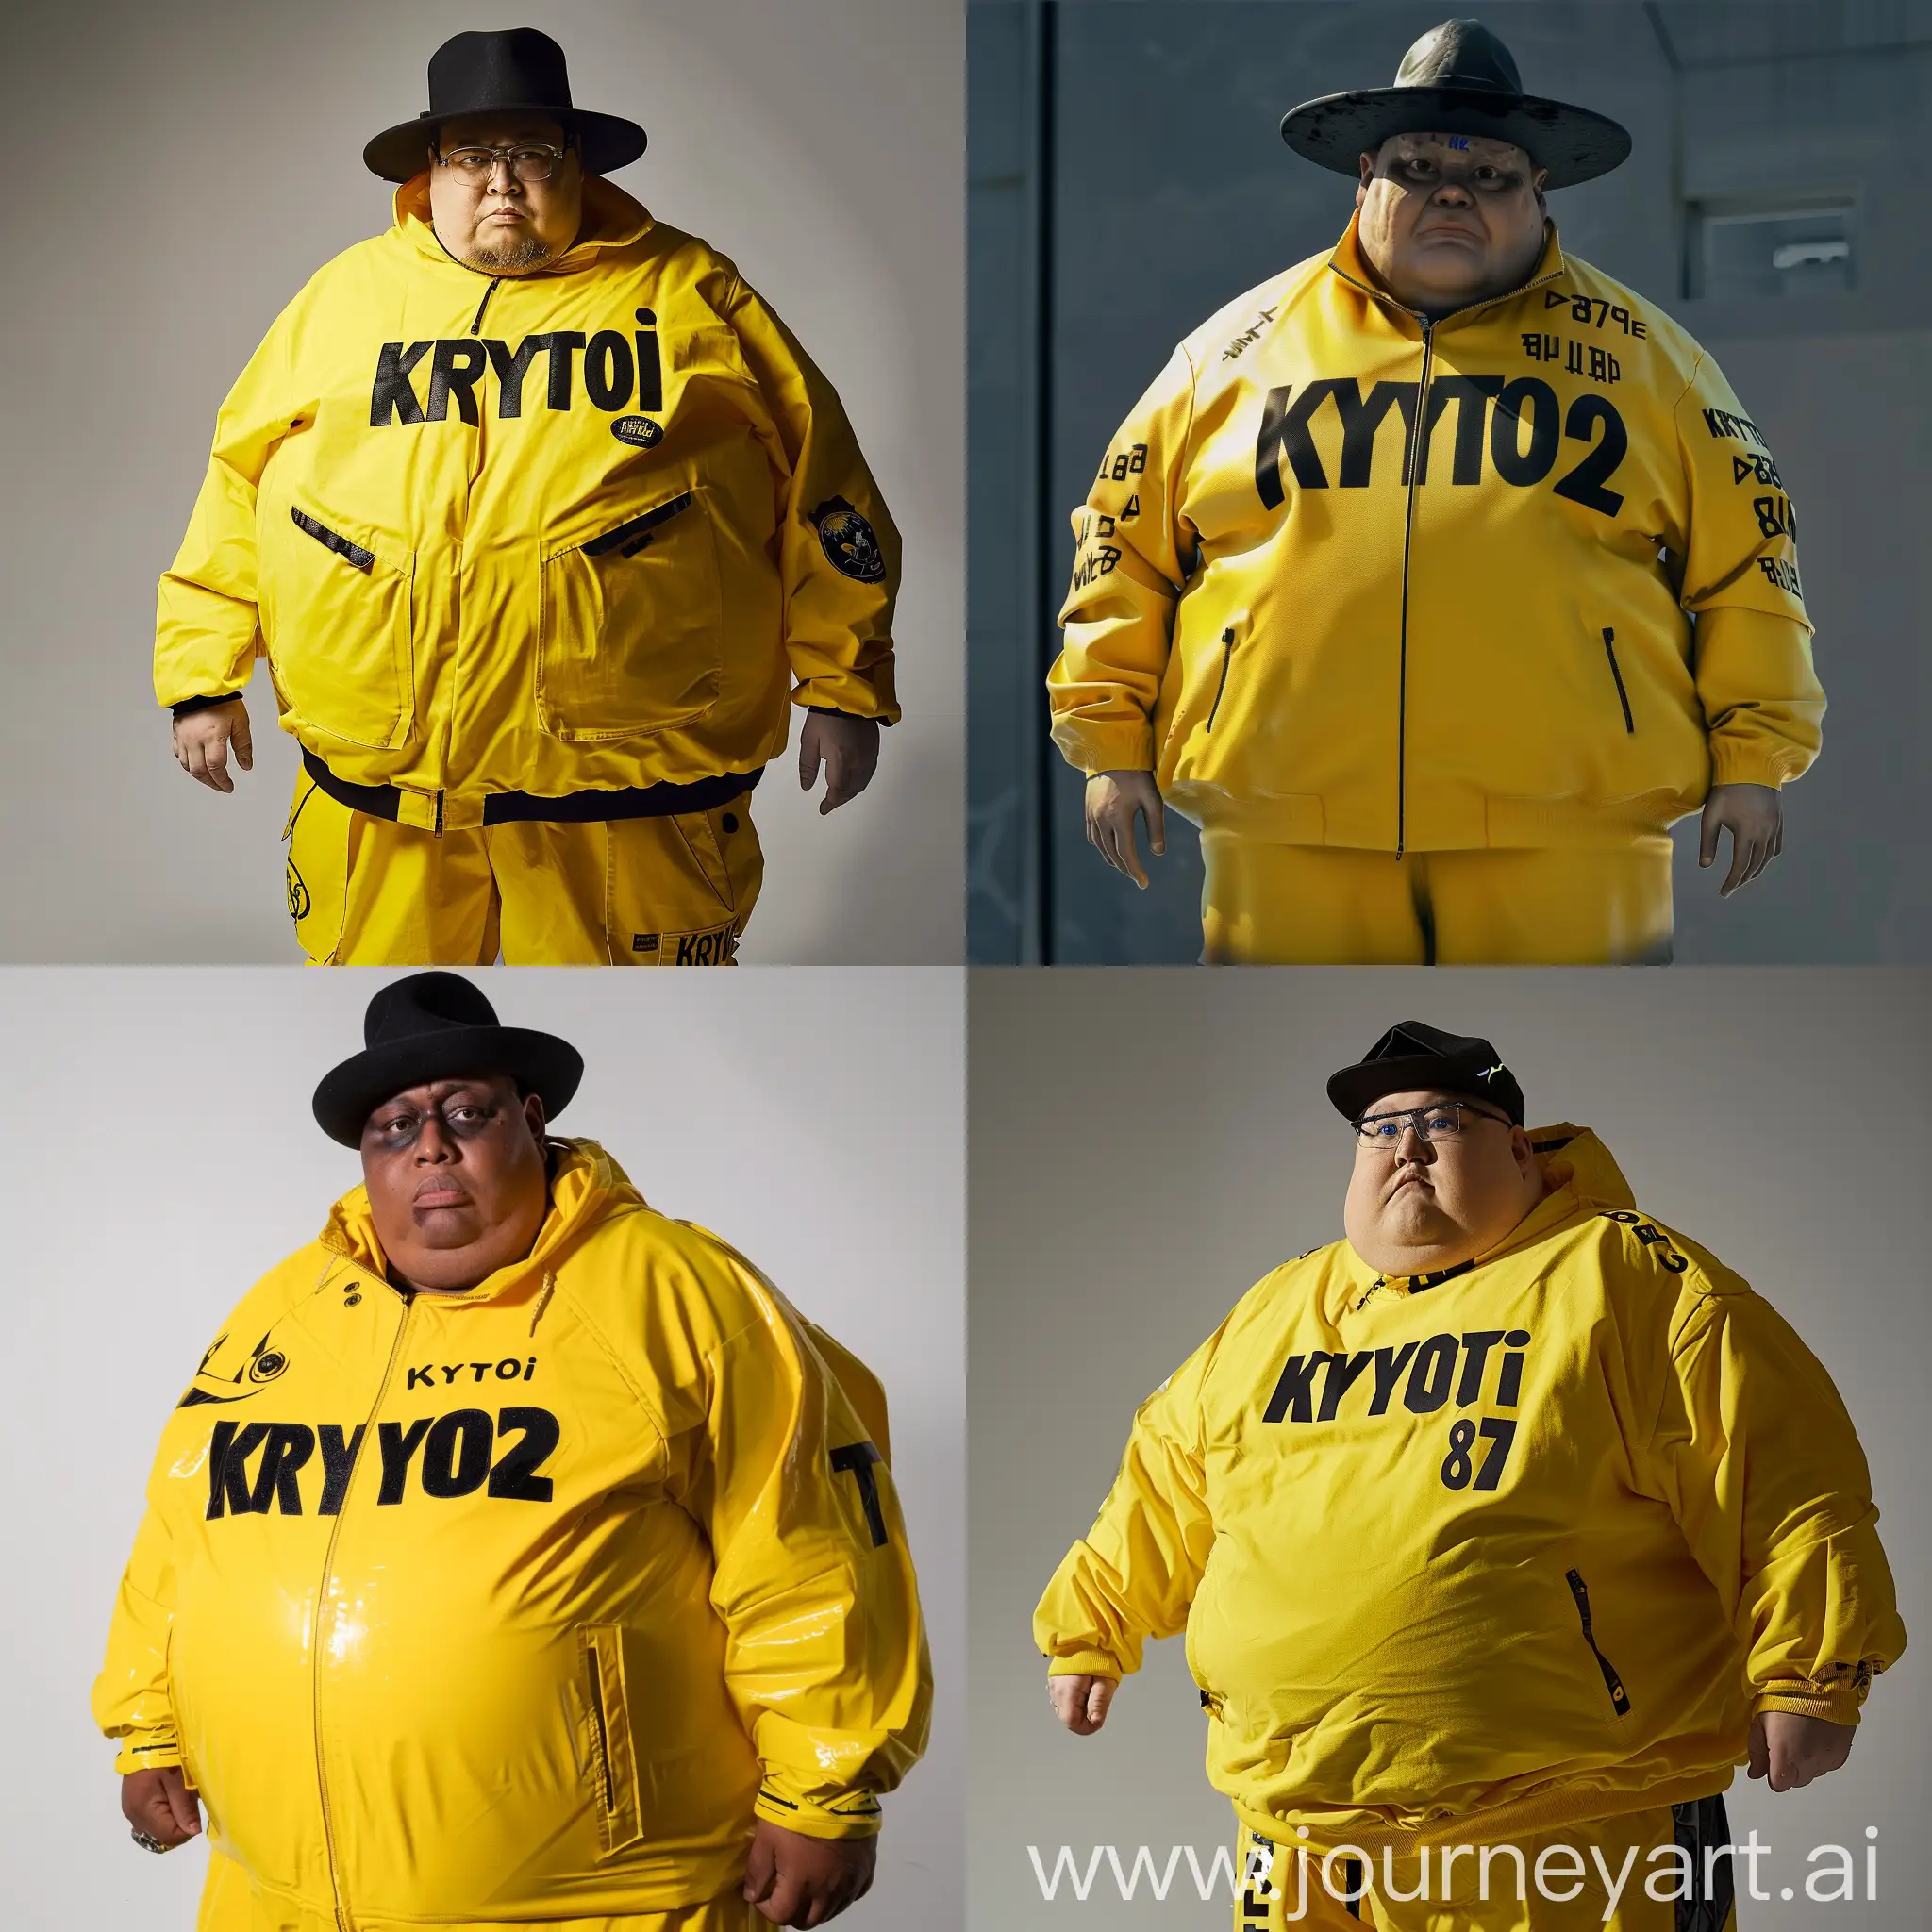 Cheerful-Fat-Person-in-Yellow-Clothing-with-Black-Hat-Krytoi872-Design